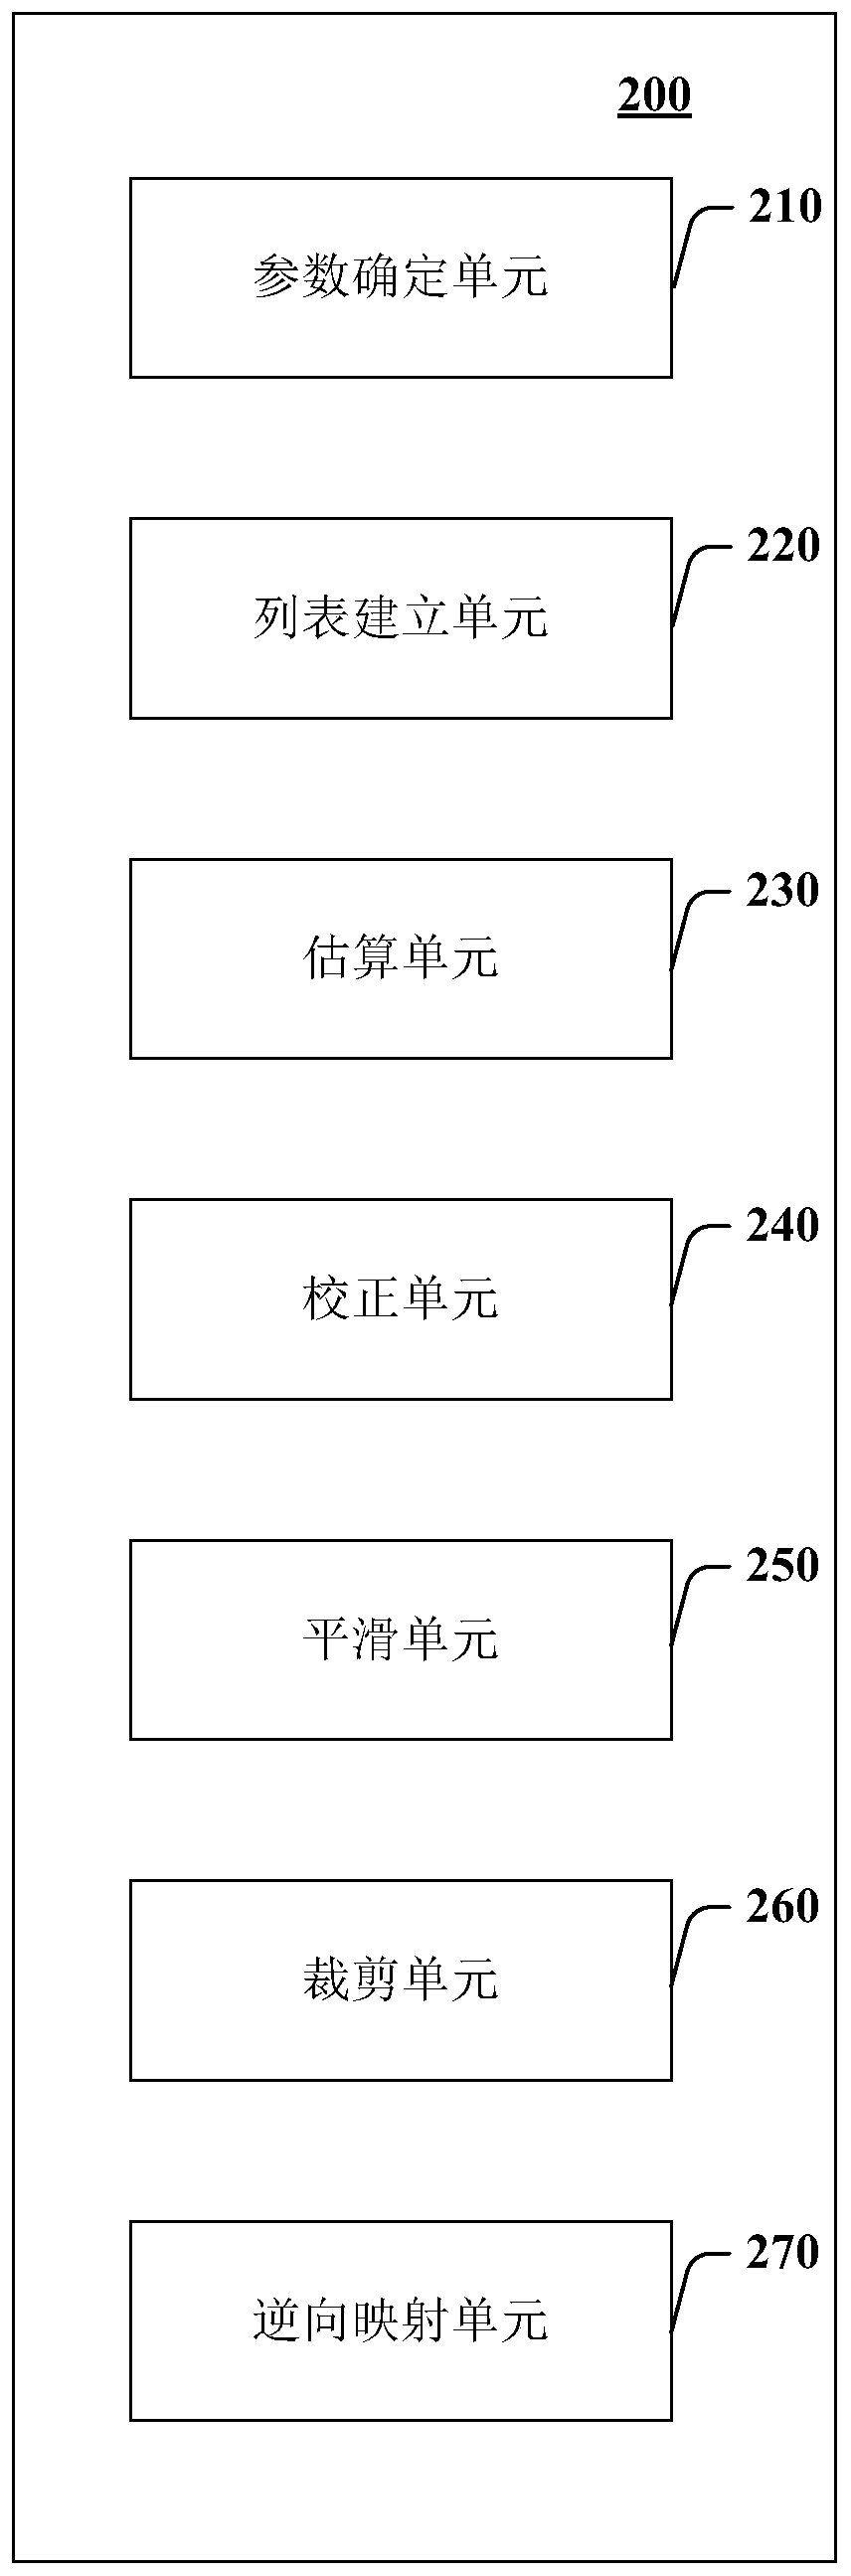 Video image stabilization method and device